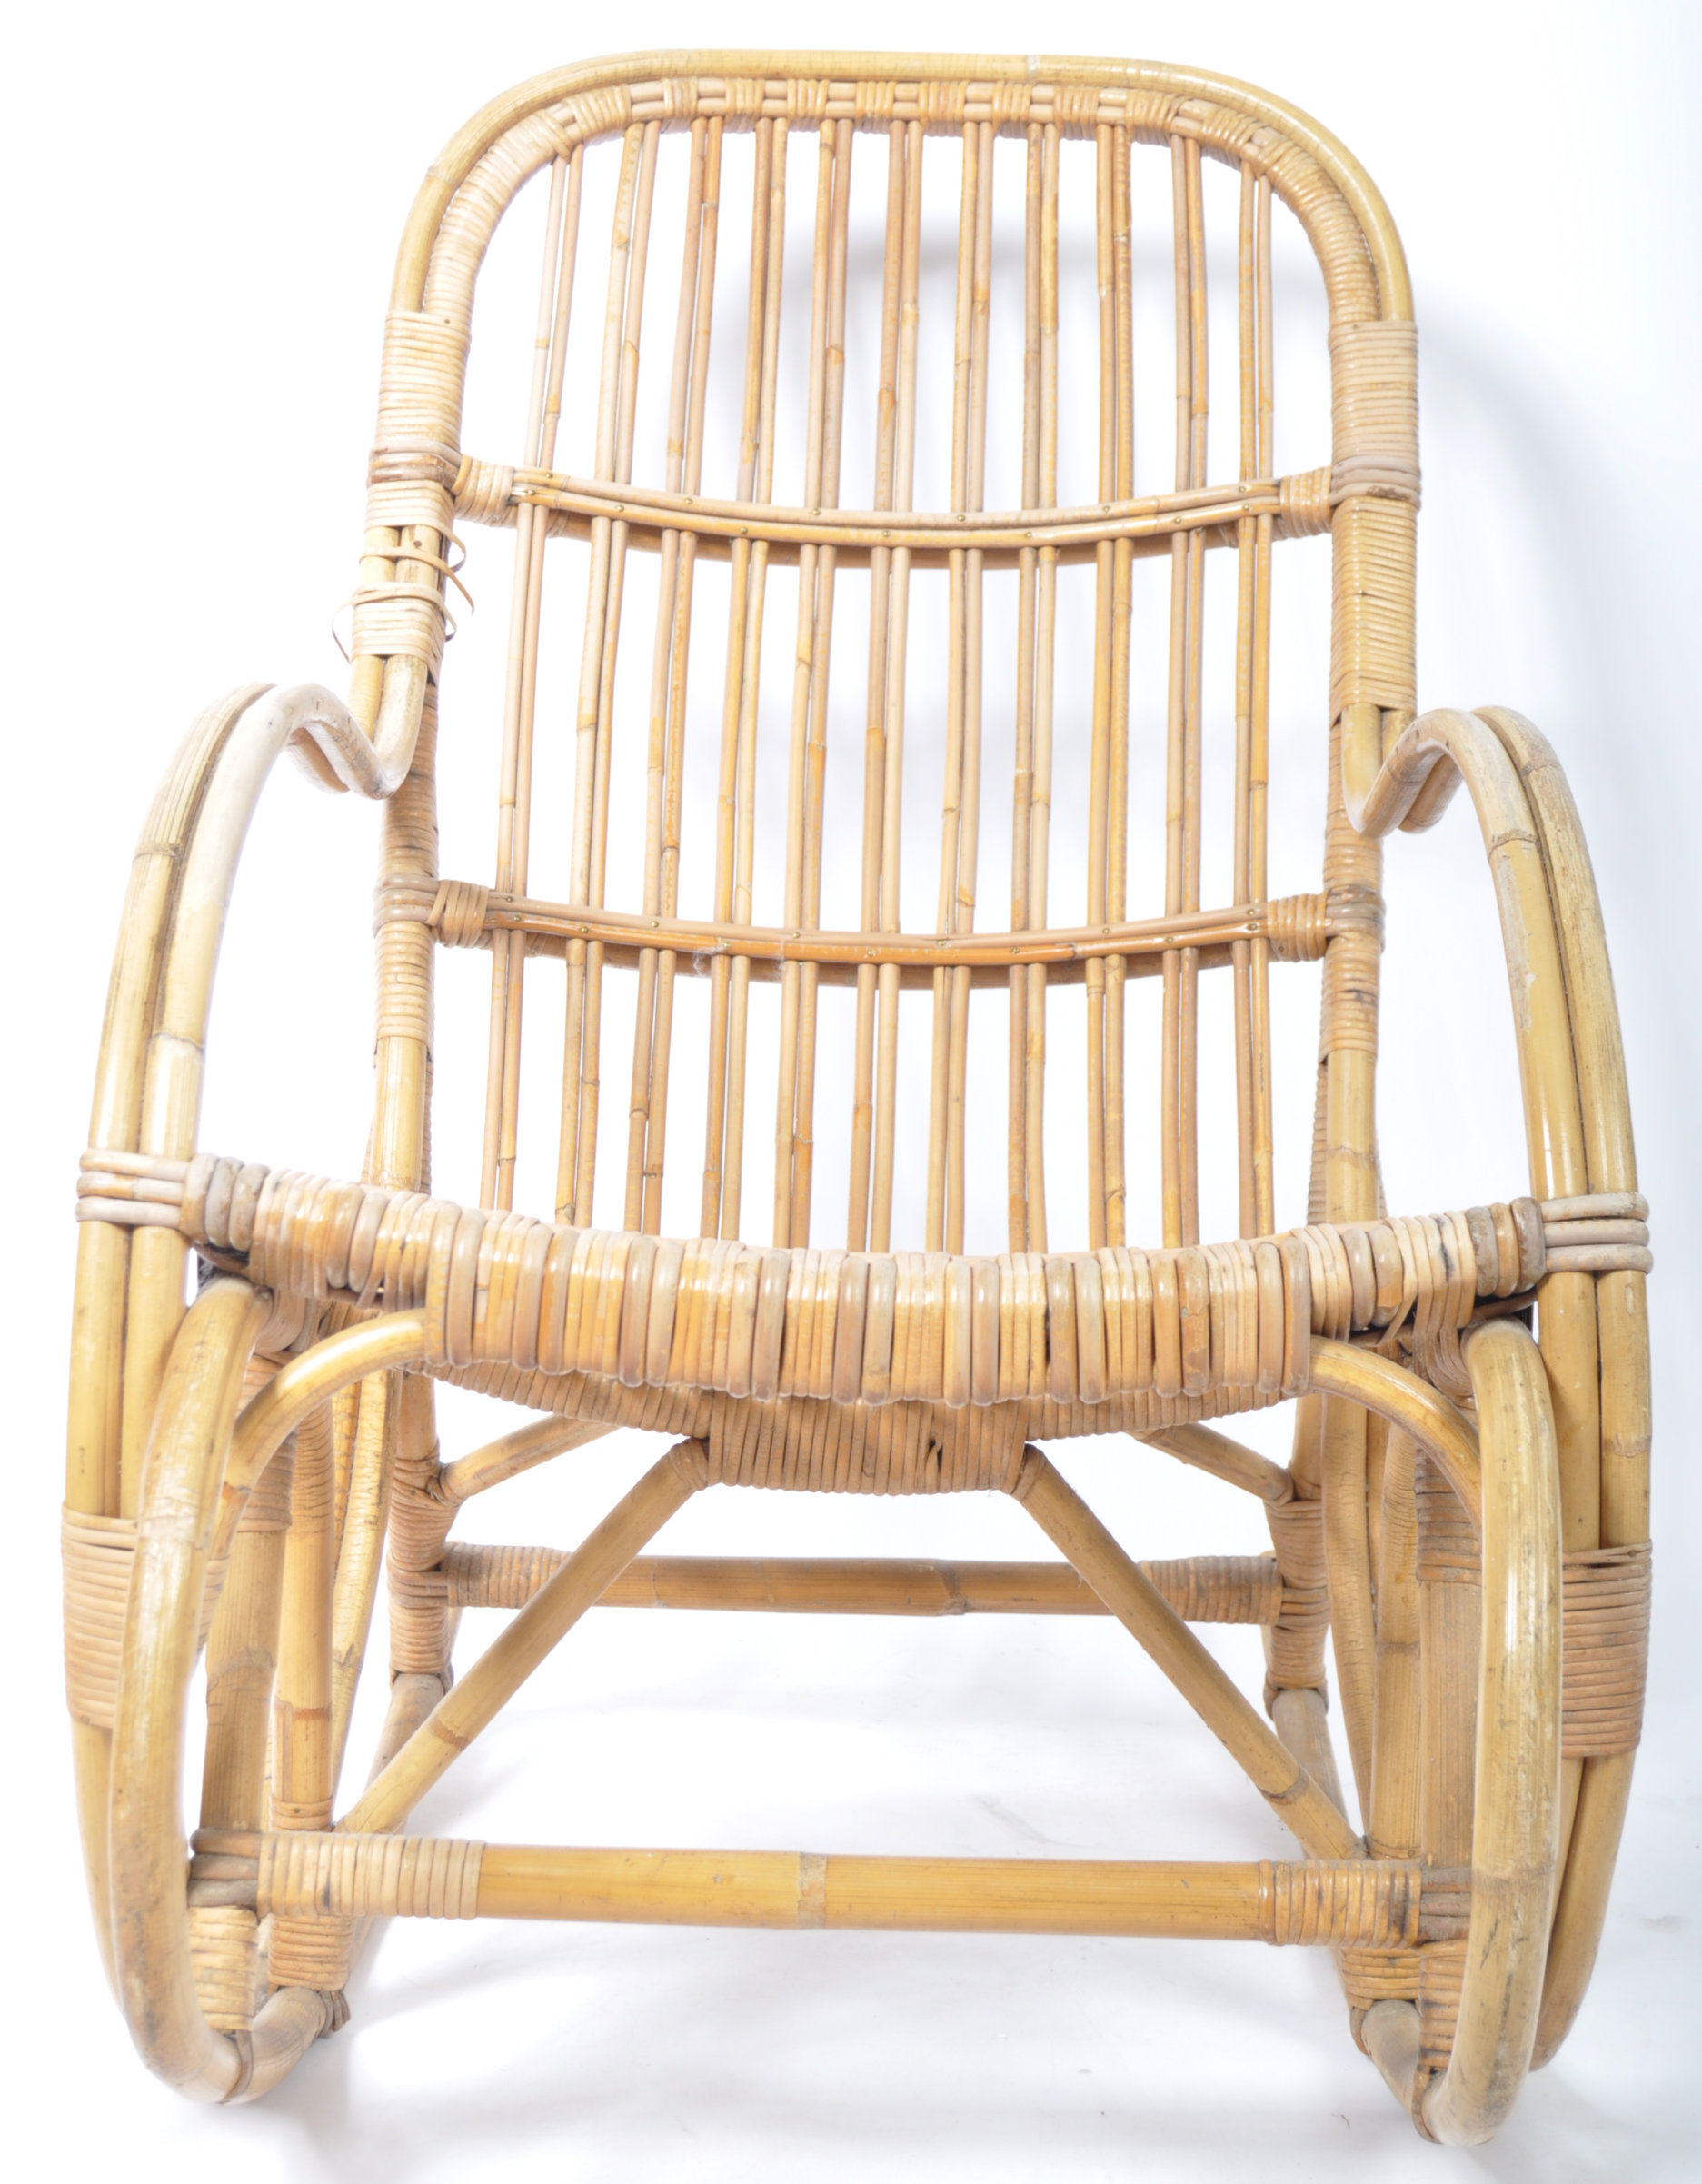 ANGRAVE'S OF LEICESTER CANE WORK "INVINCIBLE" ROCKING CHAIR - Image 5 of 9